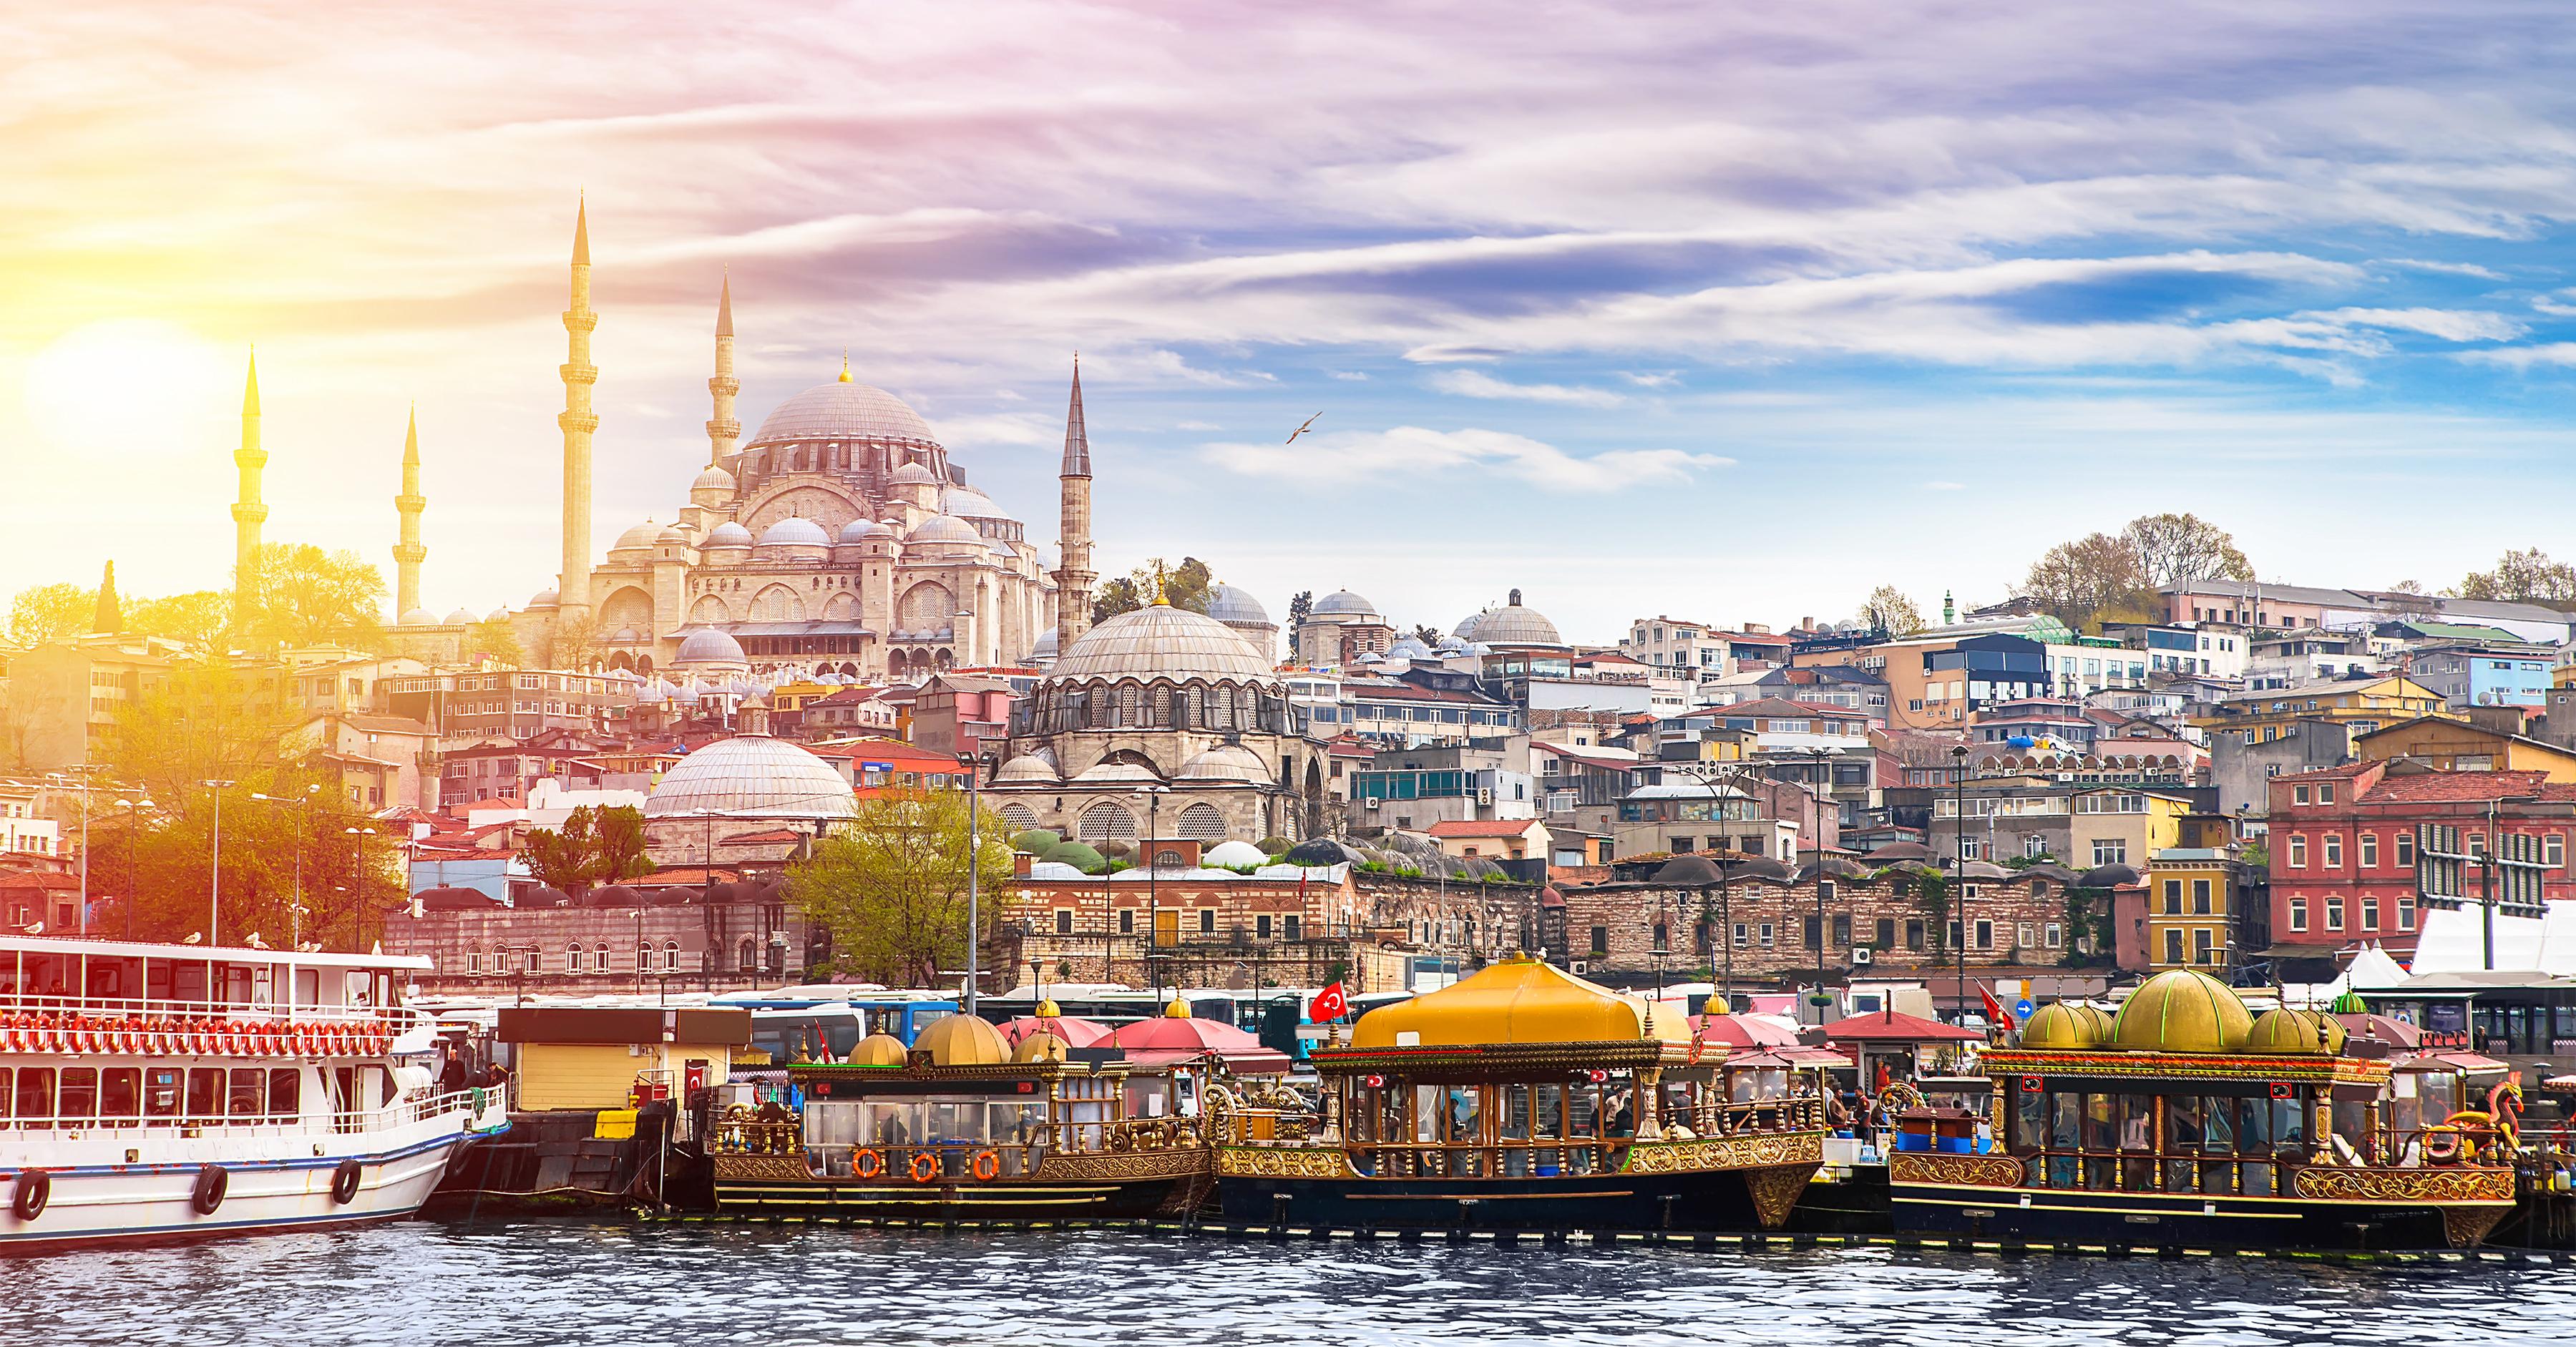 The Istanbul city, cover photo